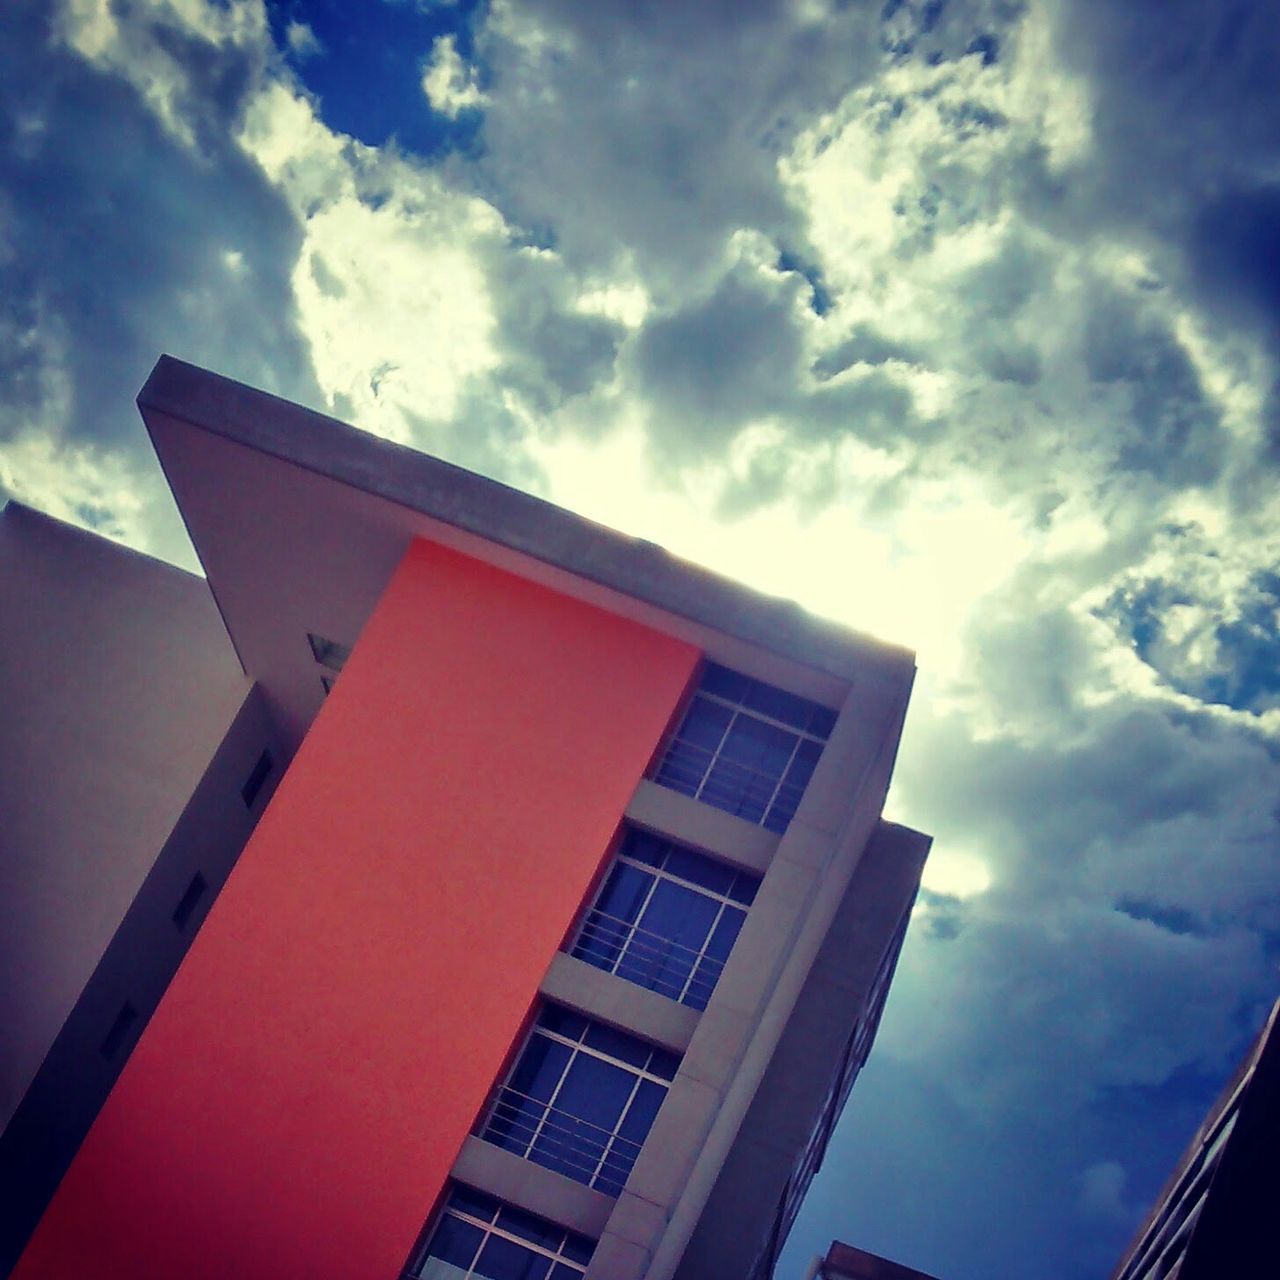 building exterior, architecture, built structure, low angle view, sky, cloud - sky, cloud, window, cloudy, building, residential structure, outdoors, residential building, day, city, no people, blue, house, high section, tower